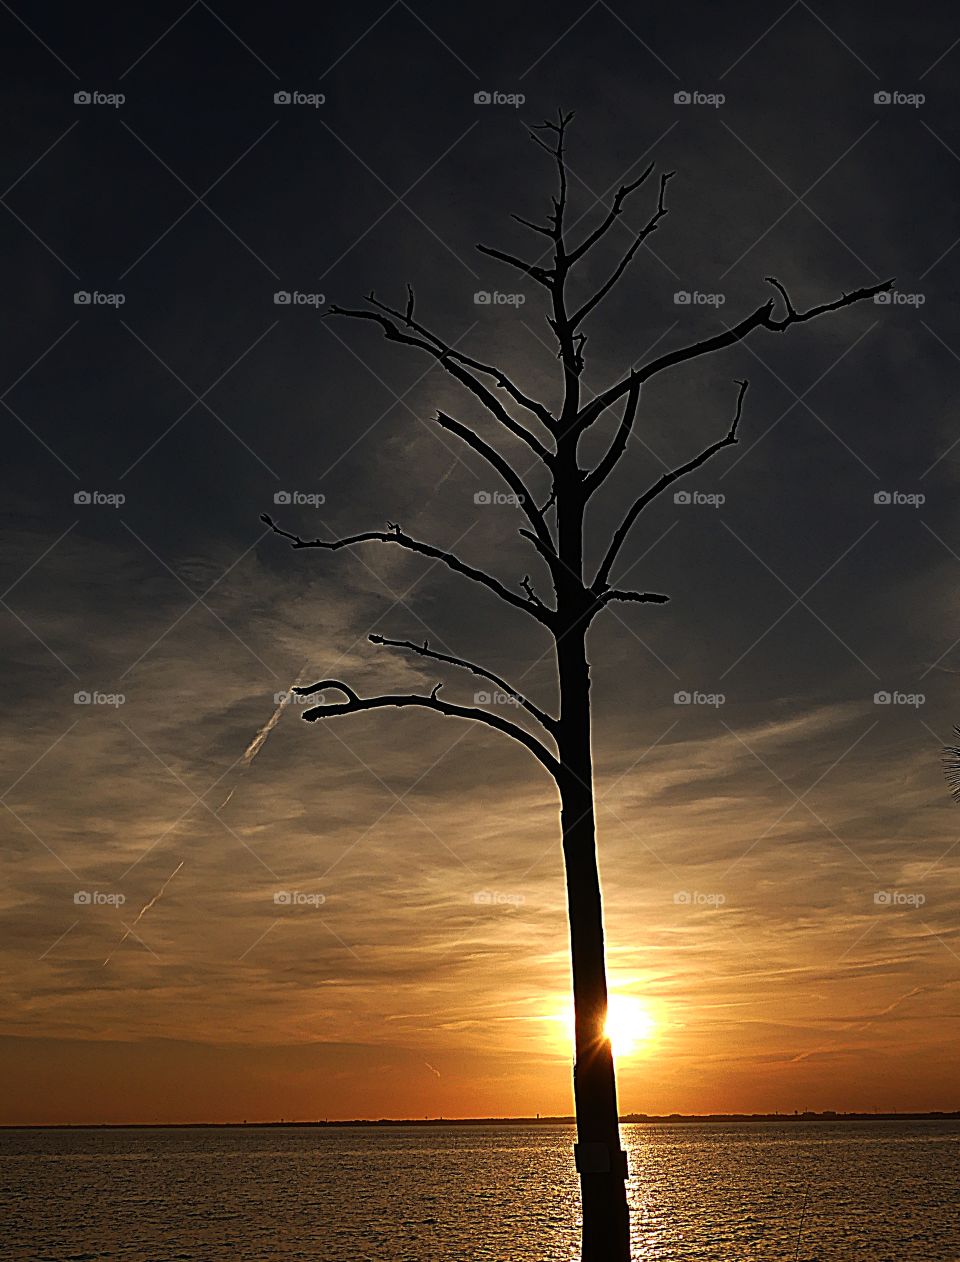 Last standing tree meets the awesome sunset